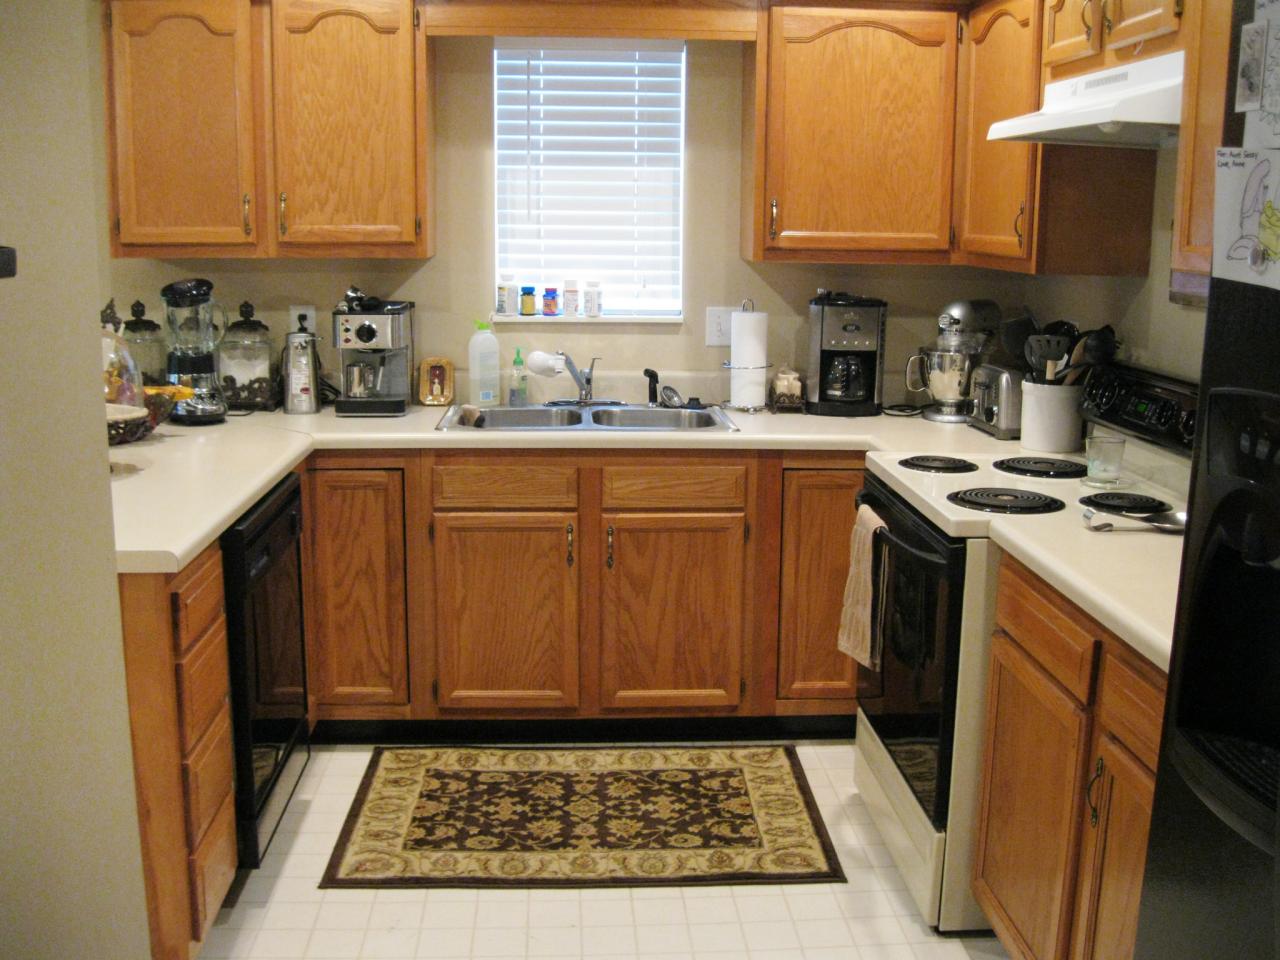 Replacing Kitchen Cabinets Pictures Ideas From Hgtv Hgtv